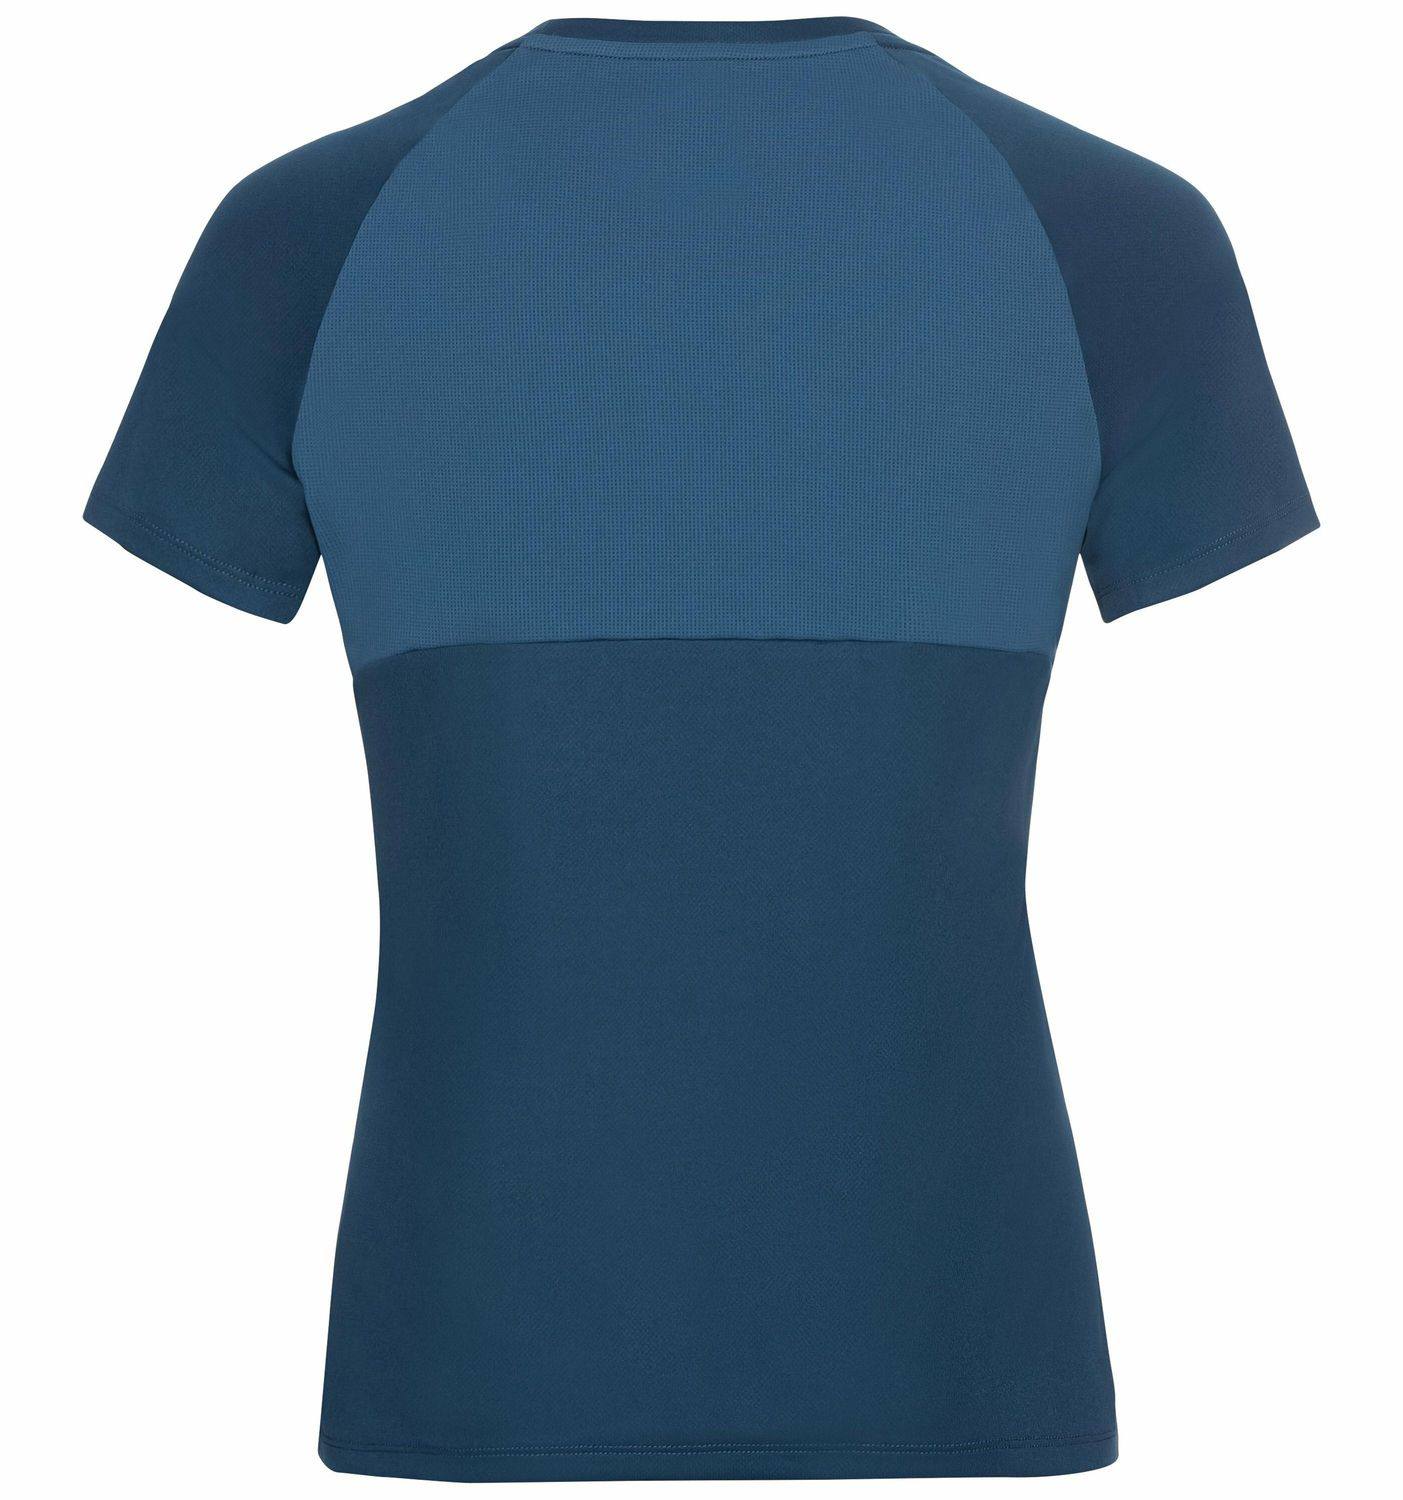 Women’s Essential Chill Tech Tee Teal S